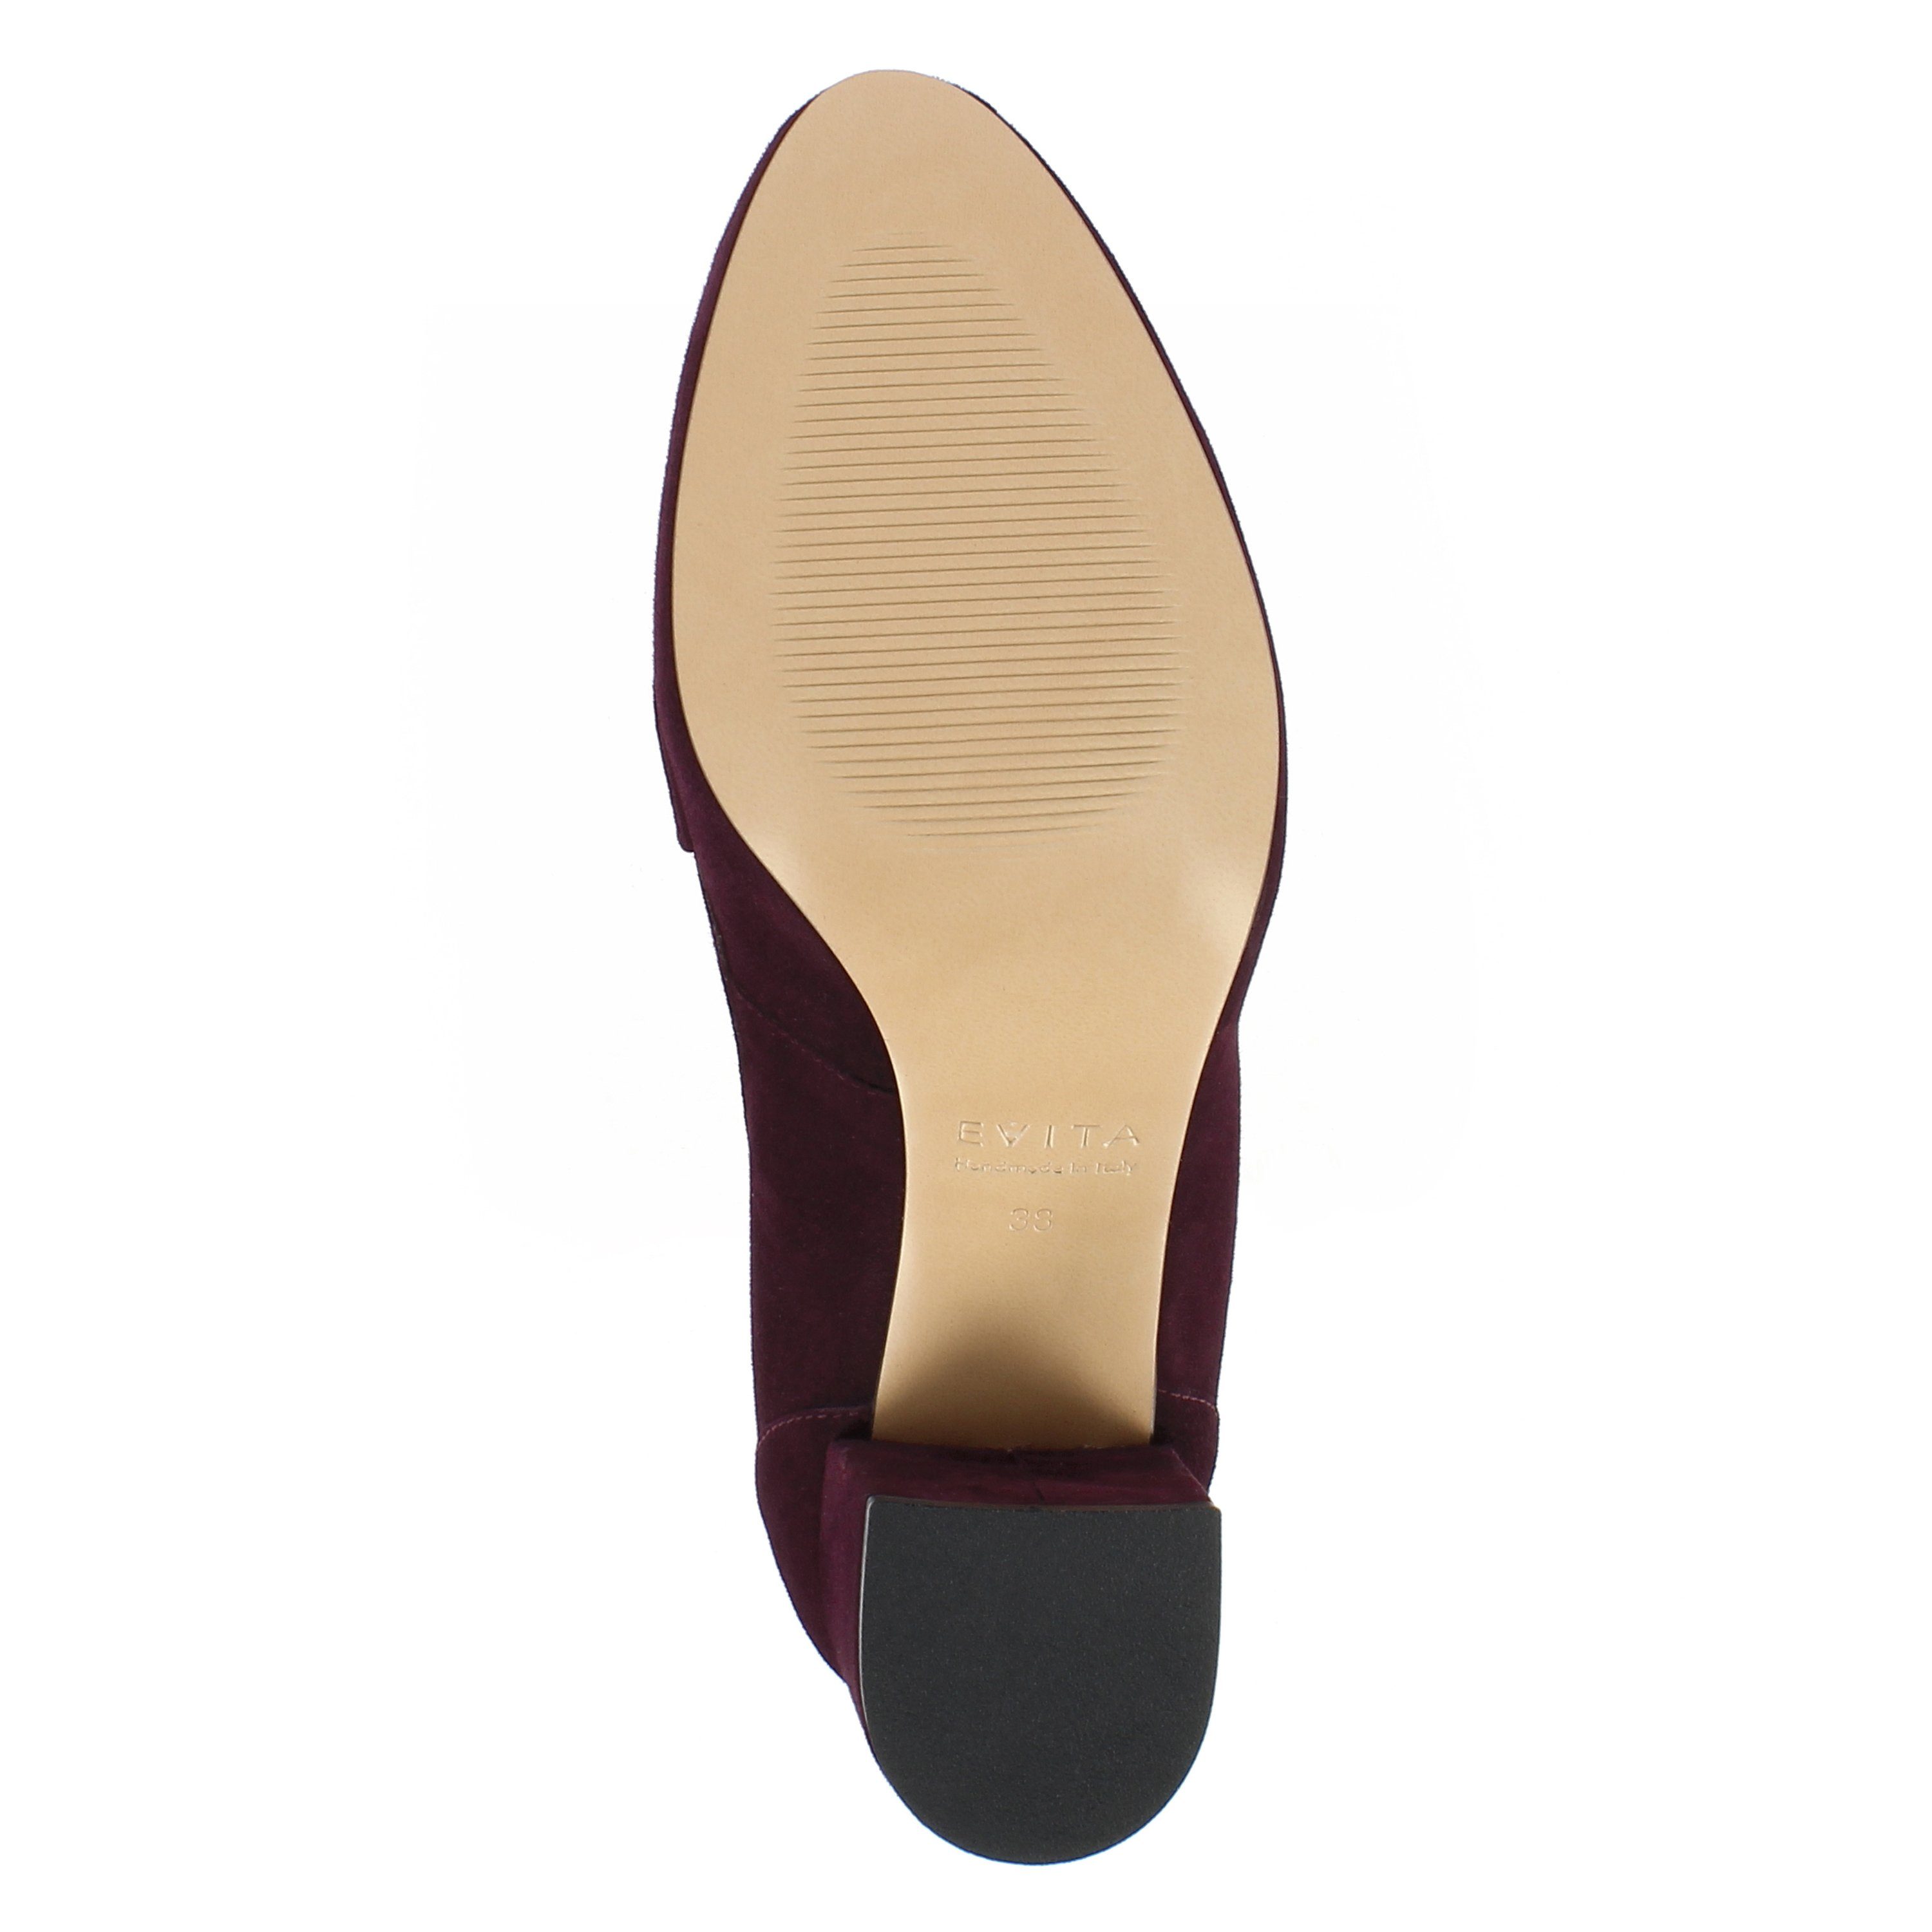 Evita NELLY Italy Handmade bordeaux Pumps in